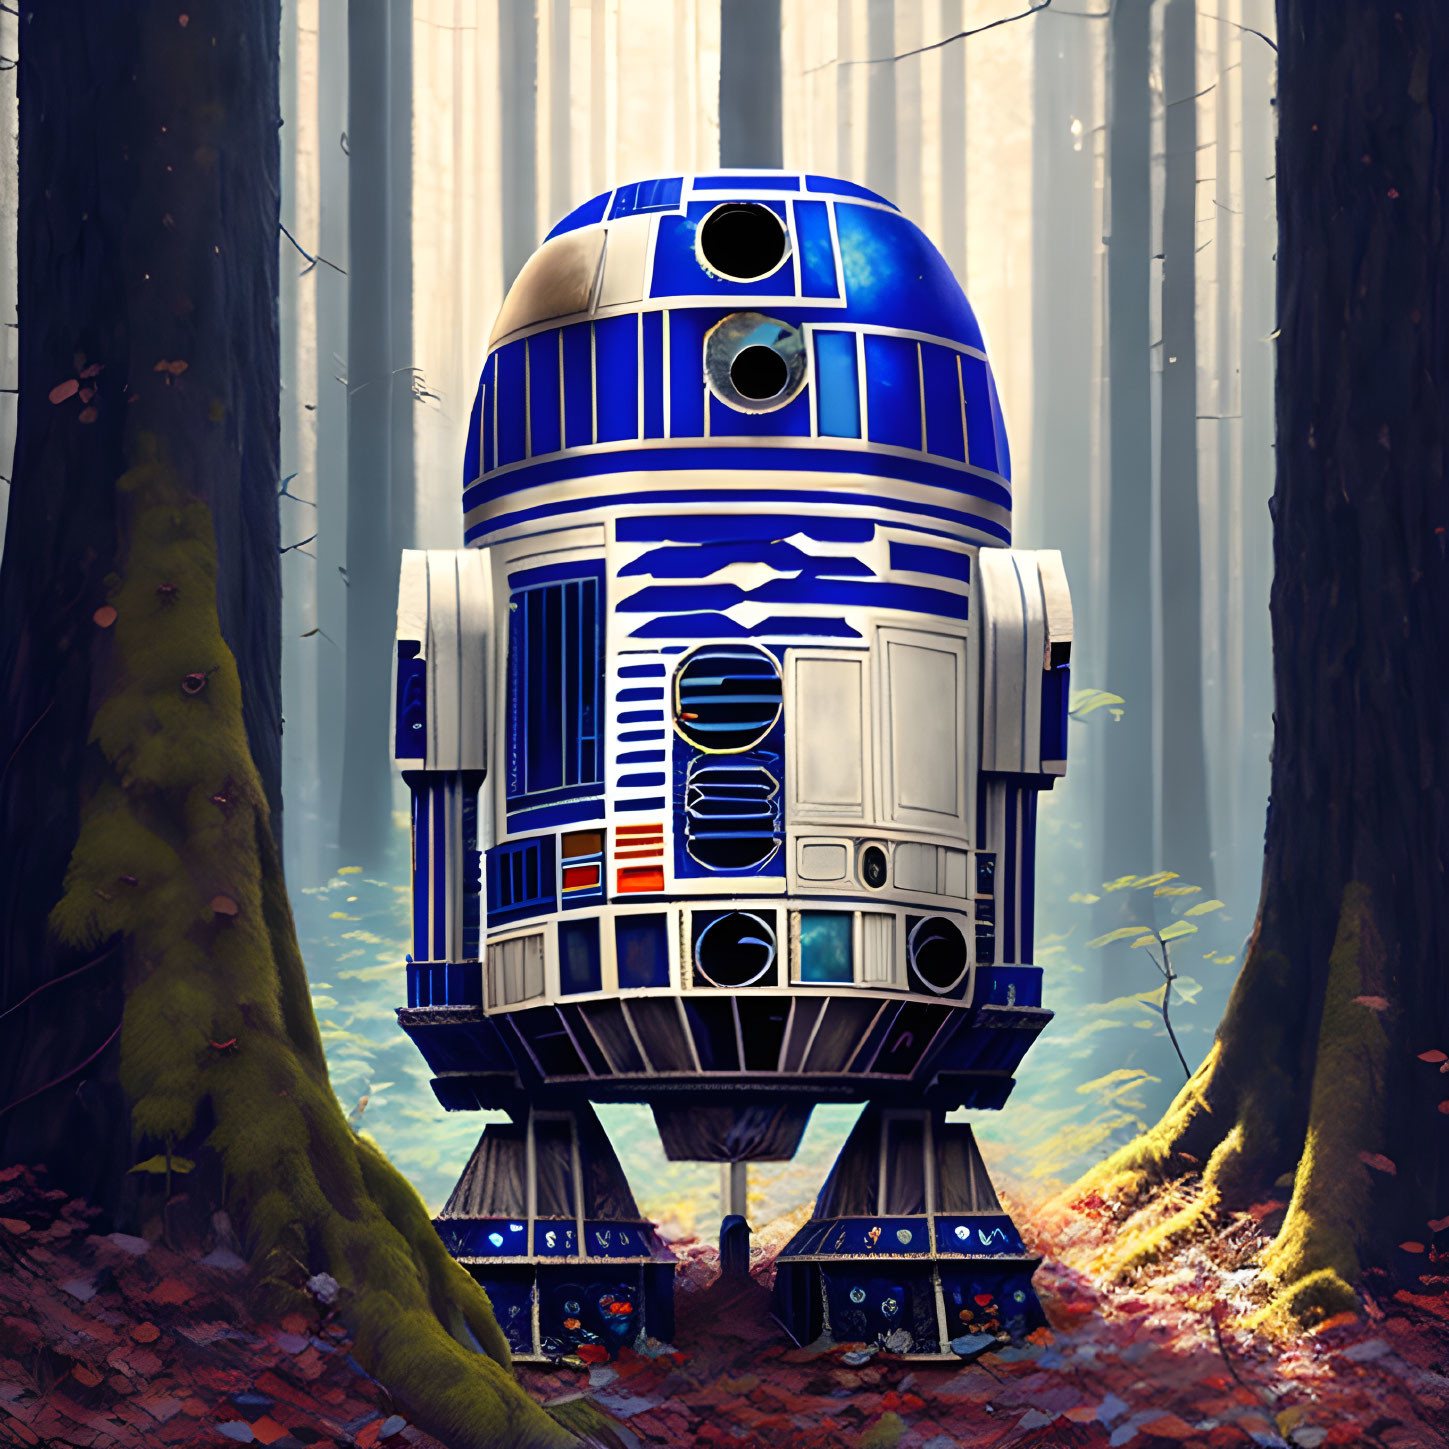 Digital illustration: R2-D2 in mystical forest with sunlight filtering through trees